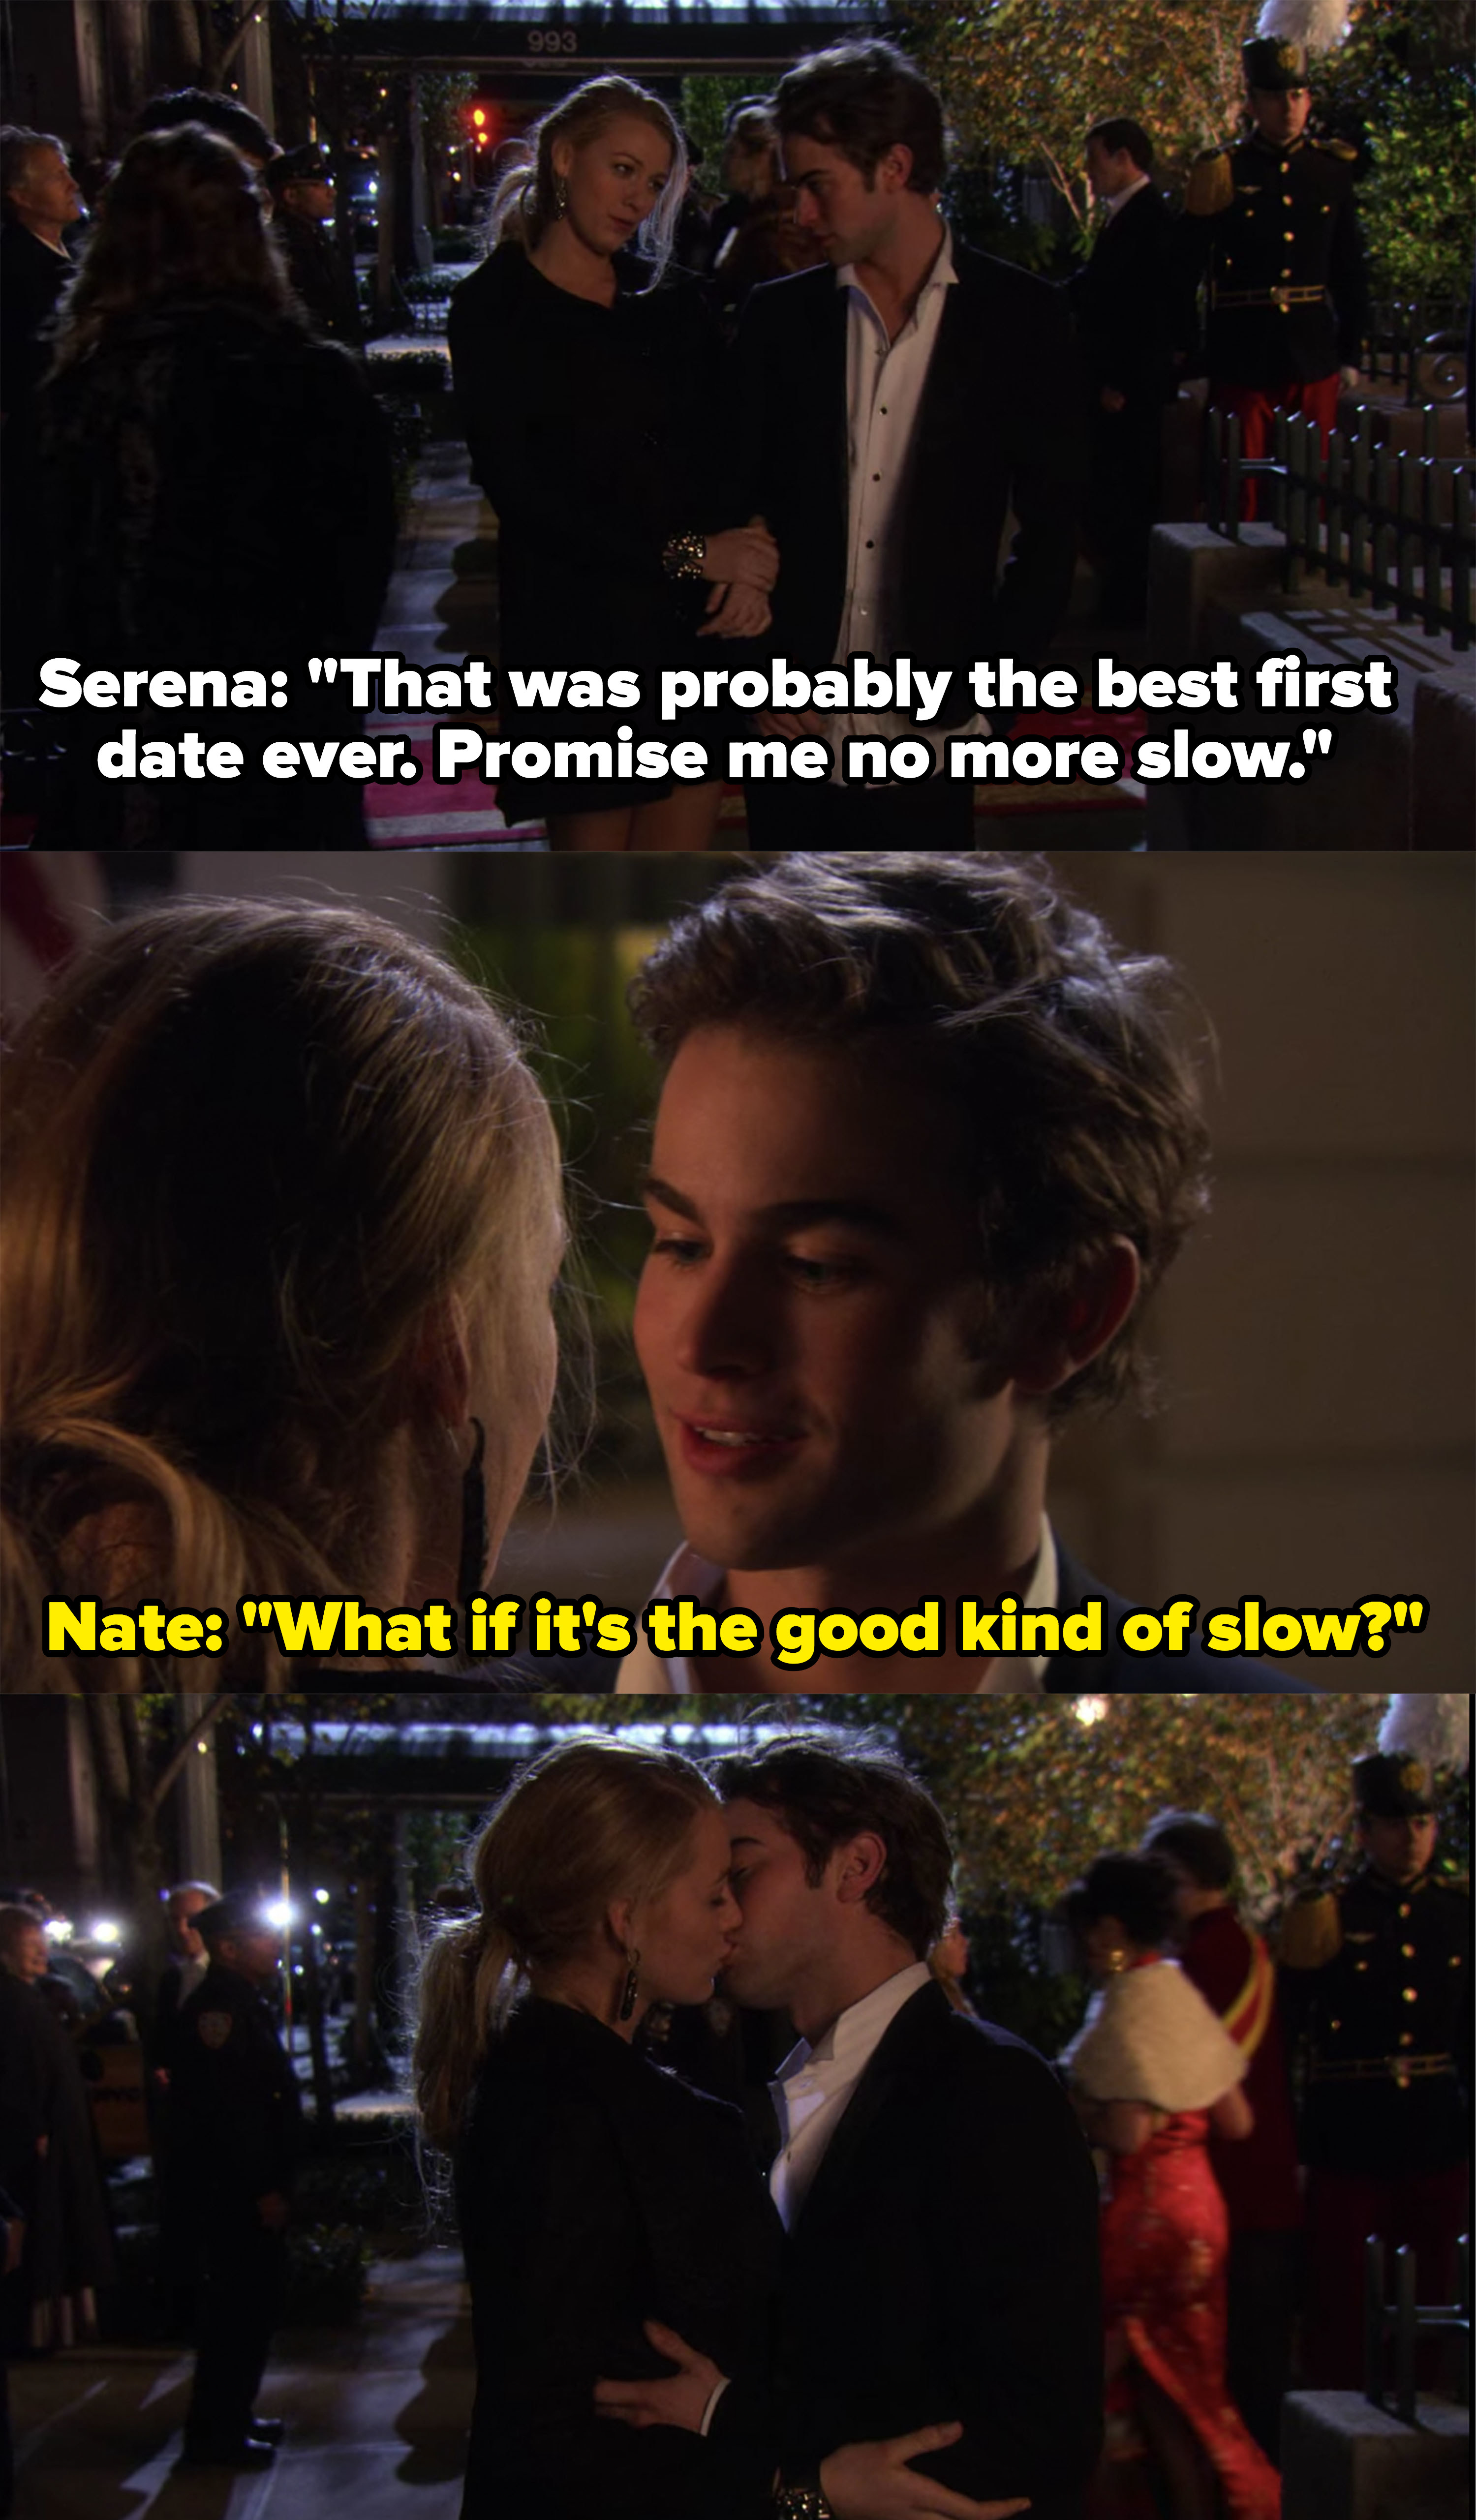 Serena: &quot;That was the best first date ever, promise me no more slow,&quot; Nate: &quot;What if it&#x27;s the good kind of slow?&quot; They kiss